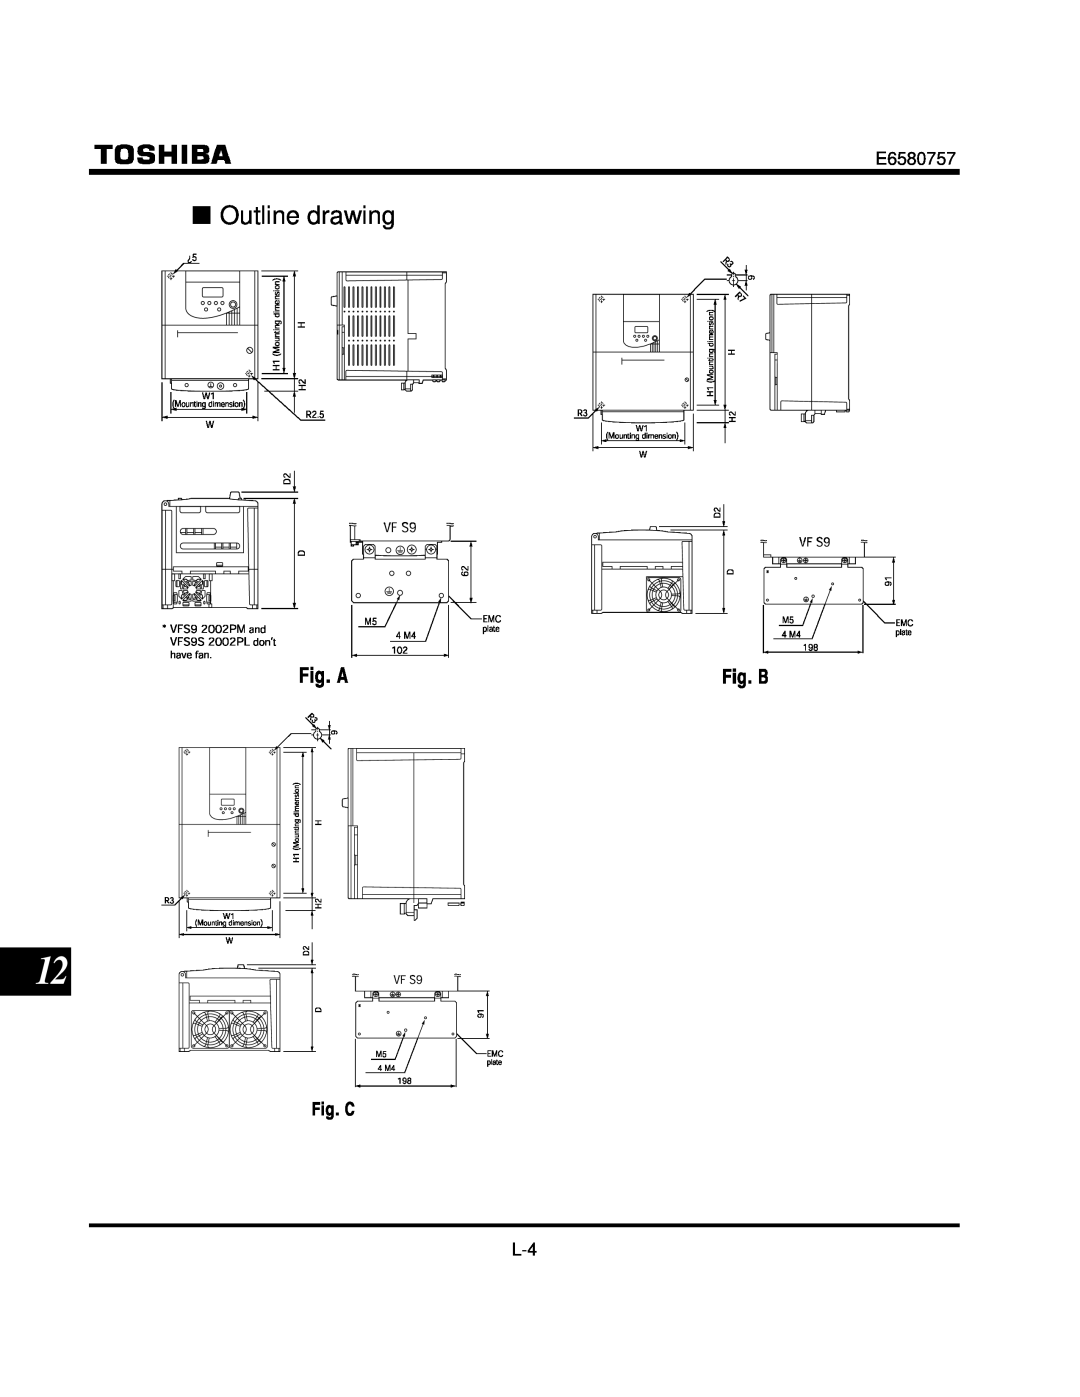 Toshiba VF-S9 VFS9, Fig.A, plate, ¿5 Outline drawing, MountingH1, MountingW1dimension, Mountingdimension, Fig.B, R2.5 